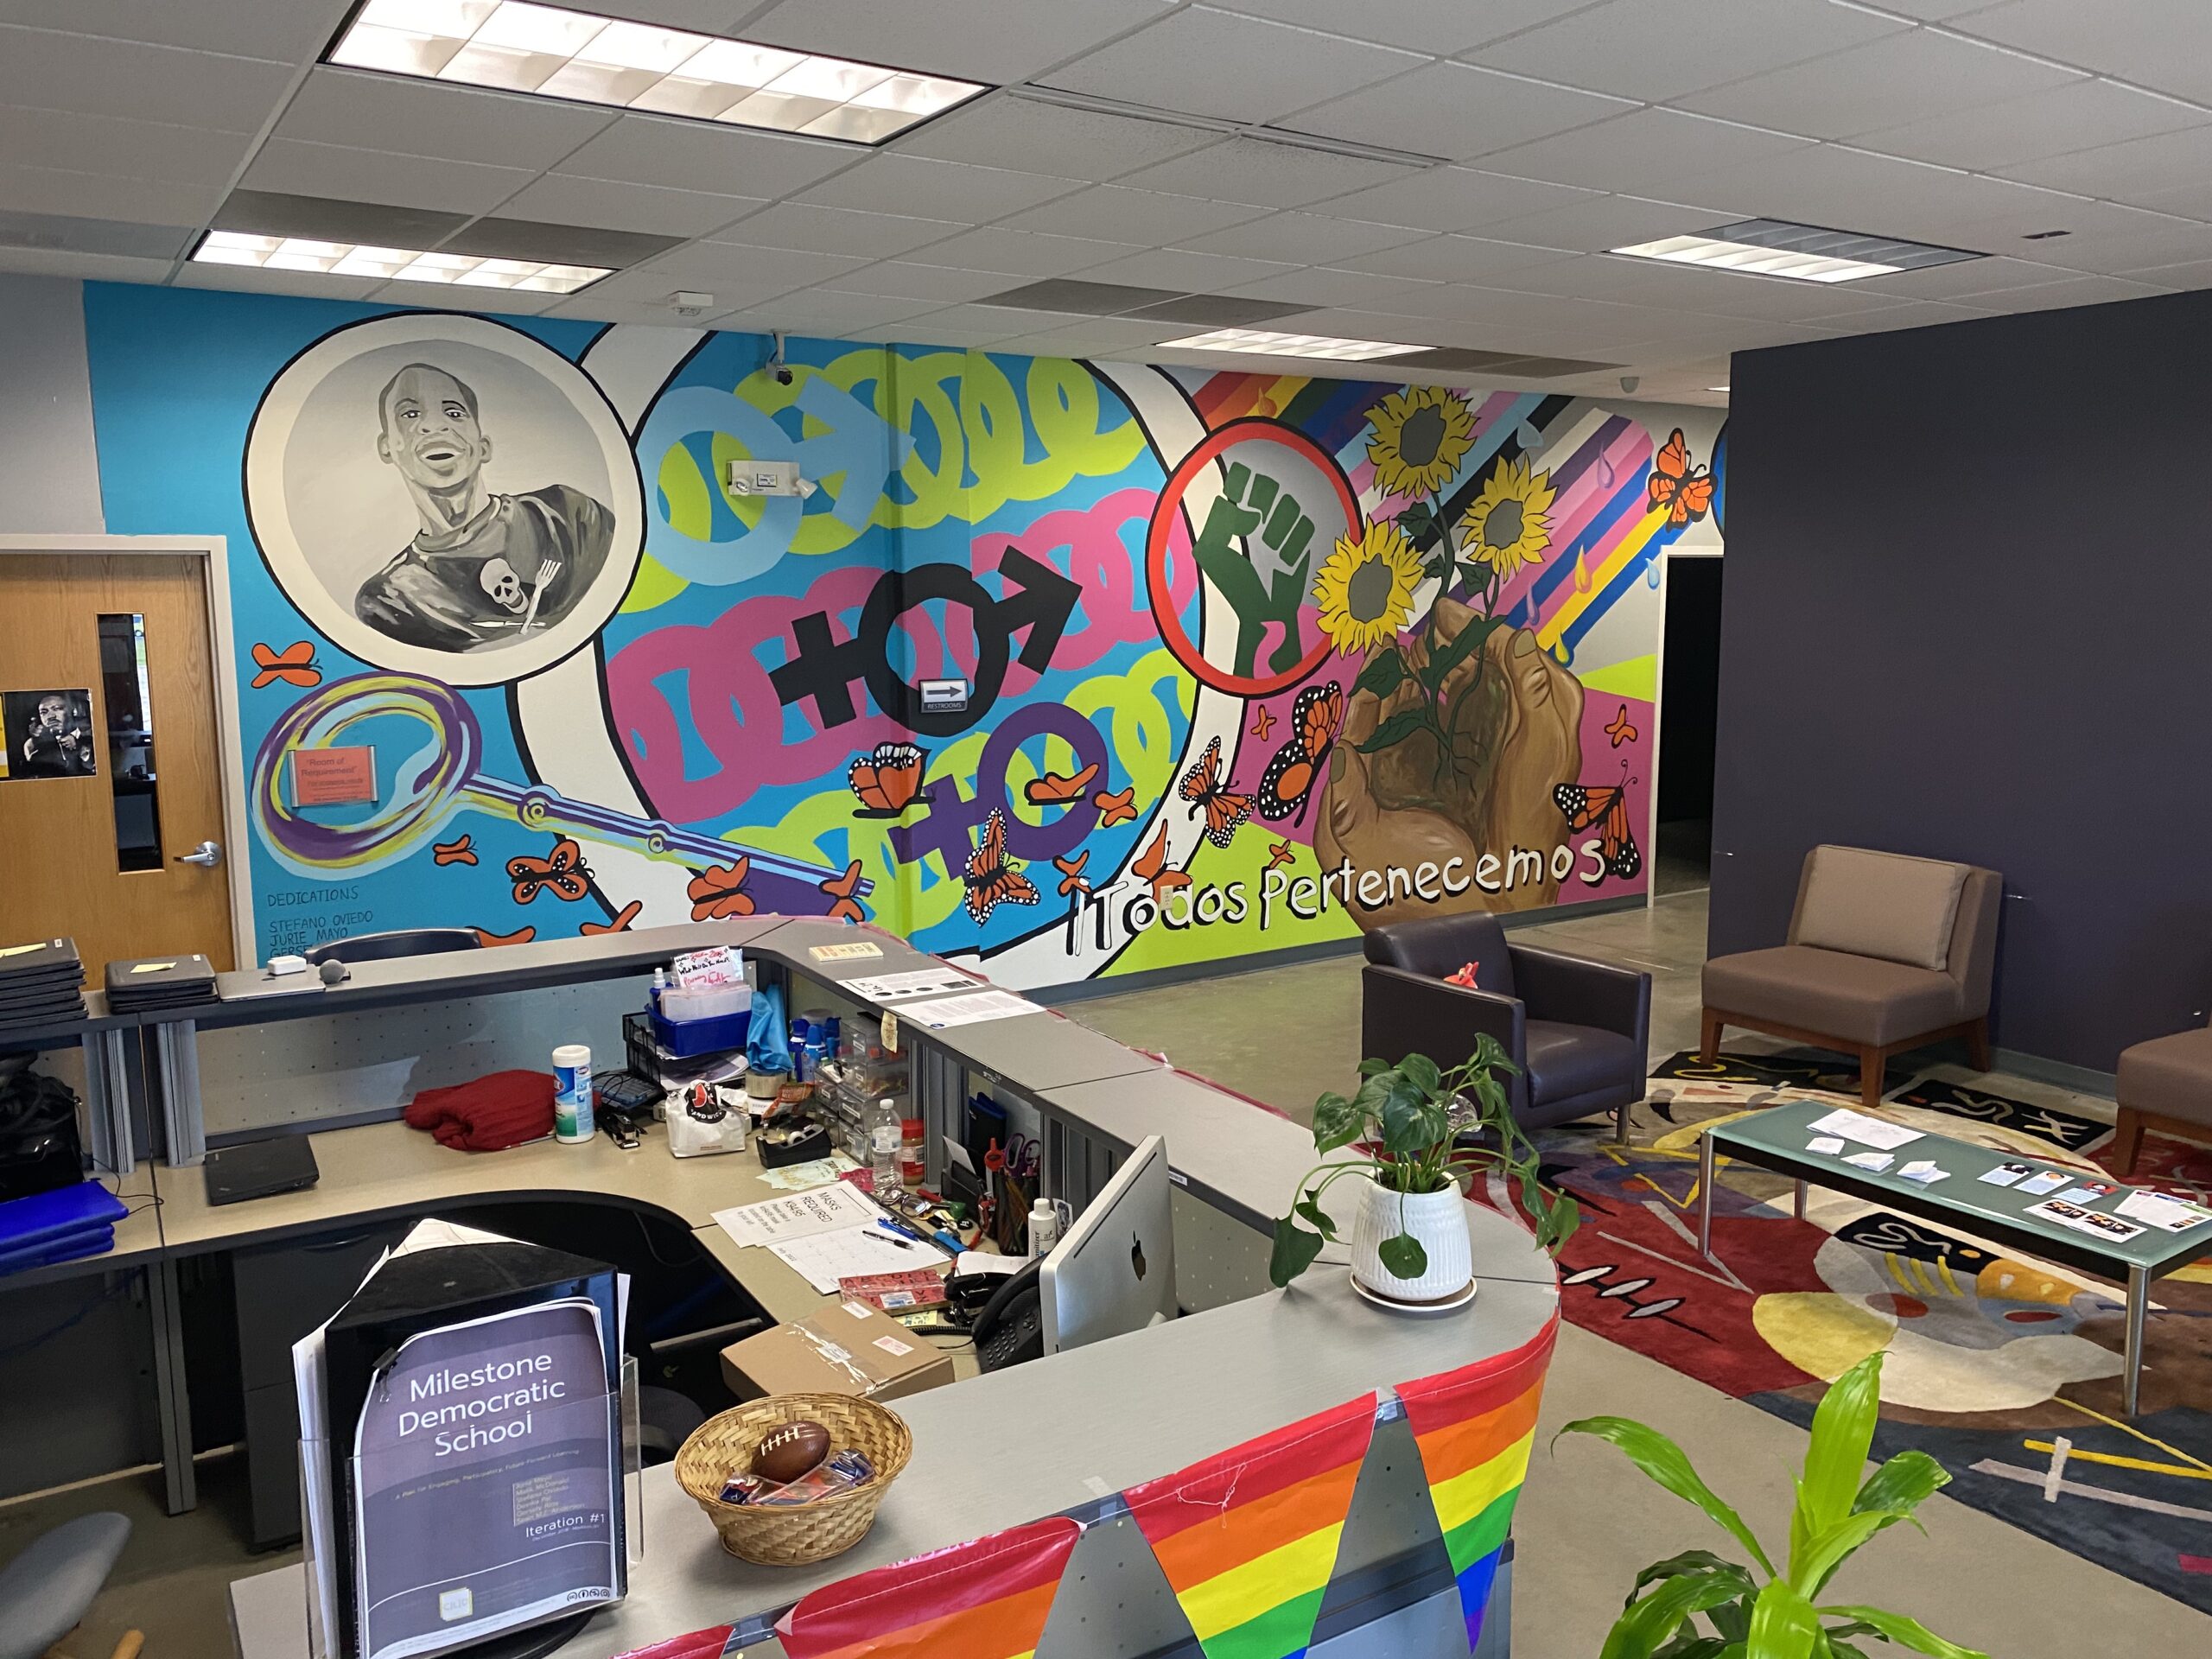 School lobby with bright colored mural and rainbow flags on the desk.